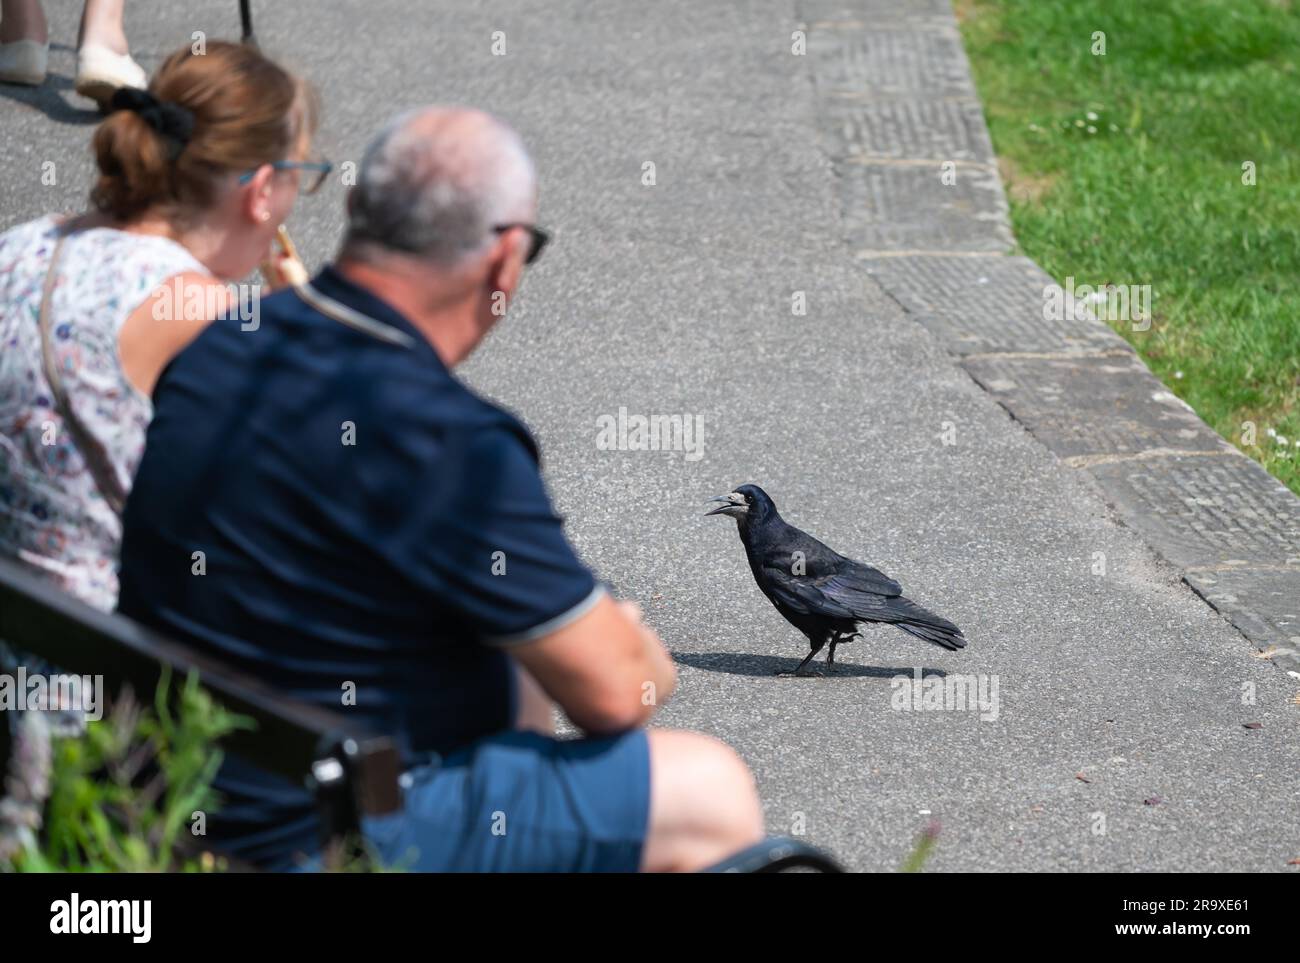 A hungry Rook (Corvus frugilegus) bird waiting for food from people eating while sitting outside on a park bench in Summer, in the UK. Stock Photo